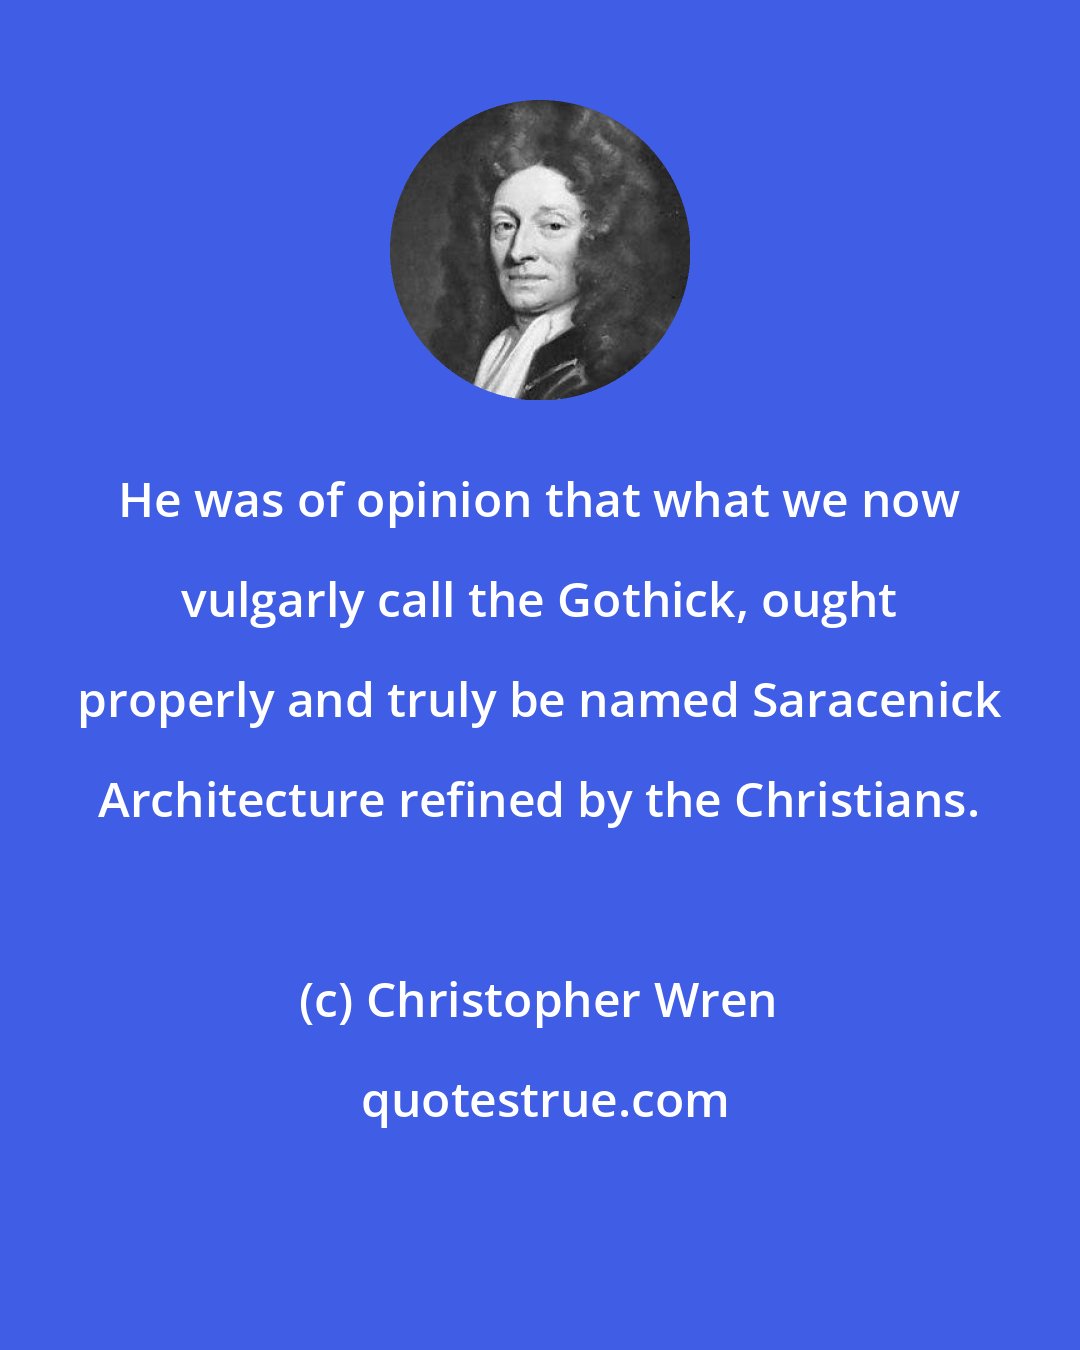 Christopher Wren: He was of opinion that what we now vulgarly call the Gothick, ought properly and truly be named Saracenick Architecture refined by the Christians.